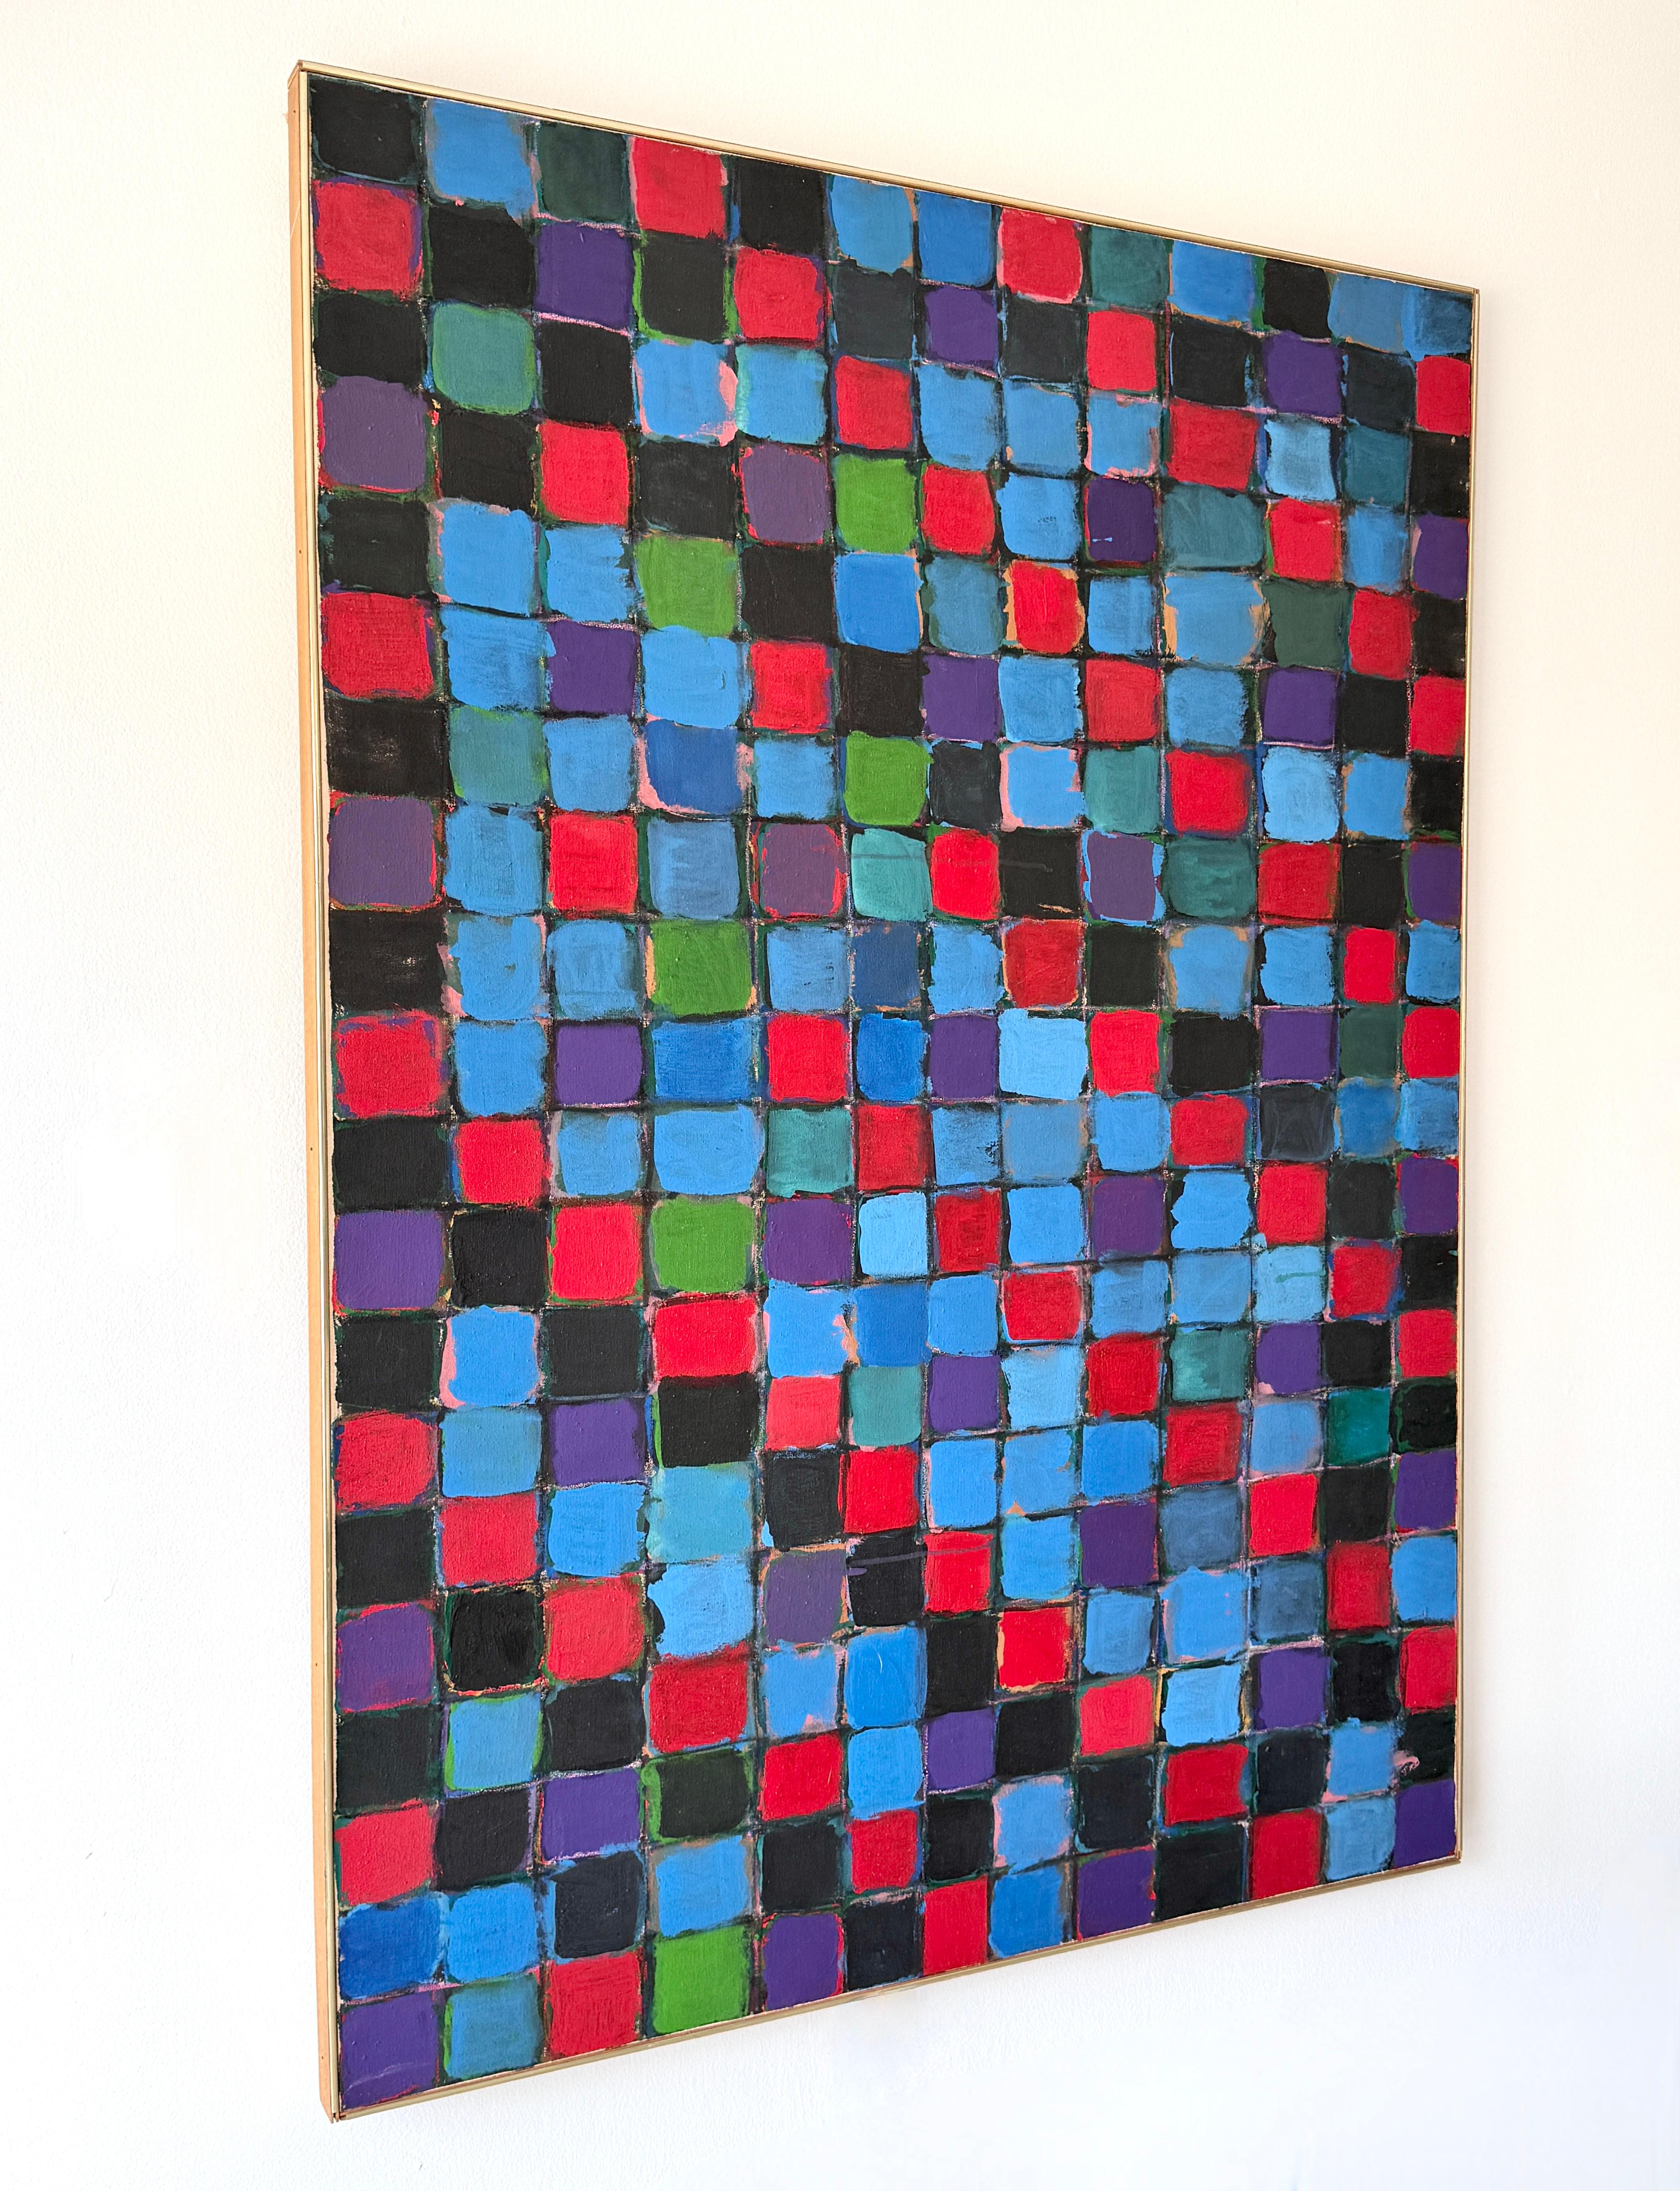 Early abstract painting by North American artist Harold Feist (1945-2021)

Mottled checkerboard of black squares and cool toned colors
66 inch height
48 inch width

Wired for both vertical and horizontal display

Signed dated 1971 and titled on